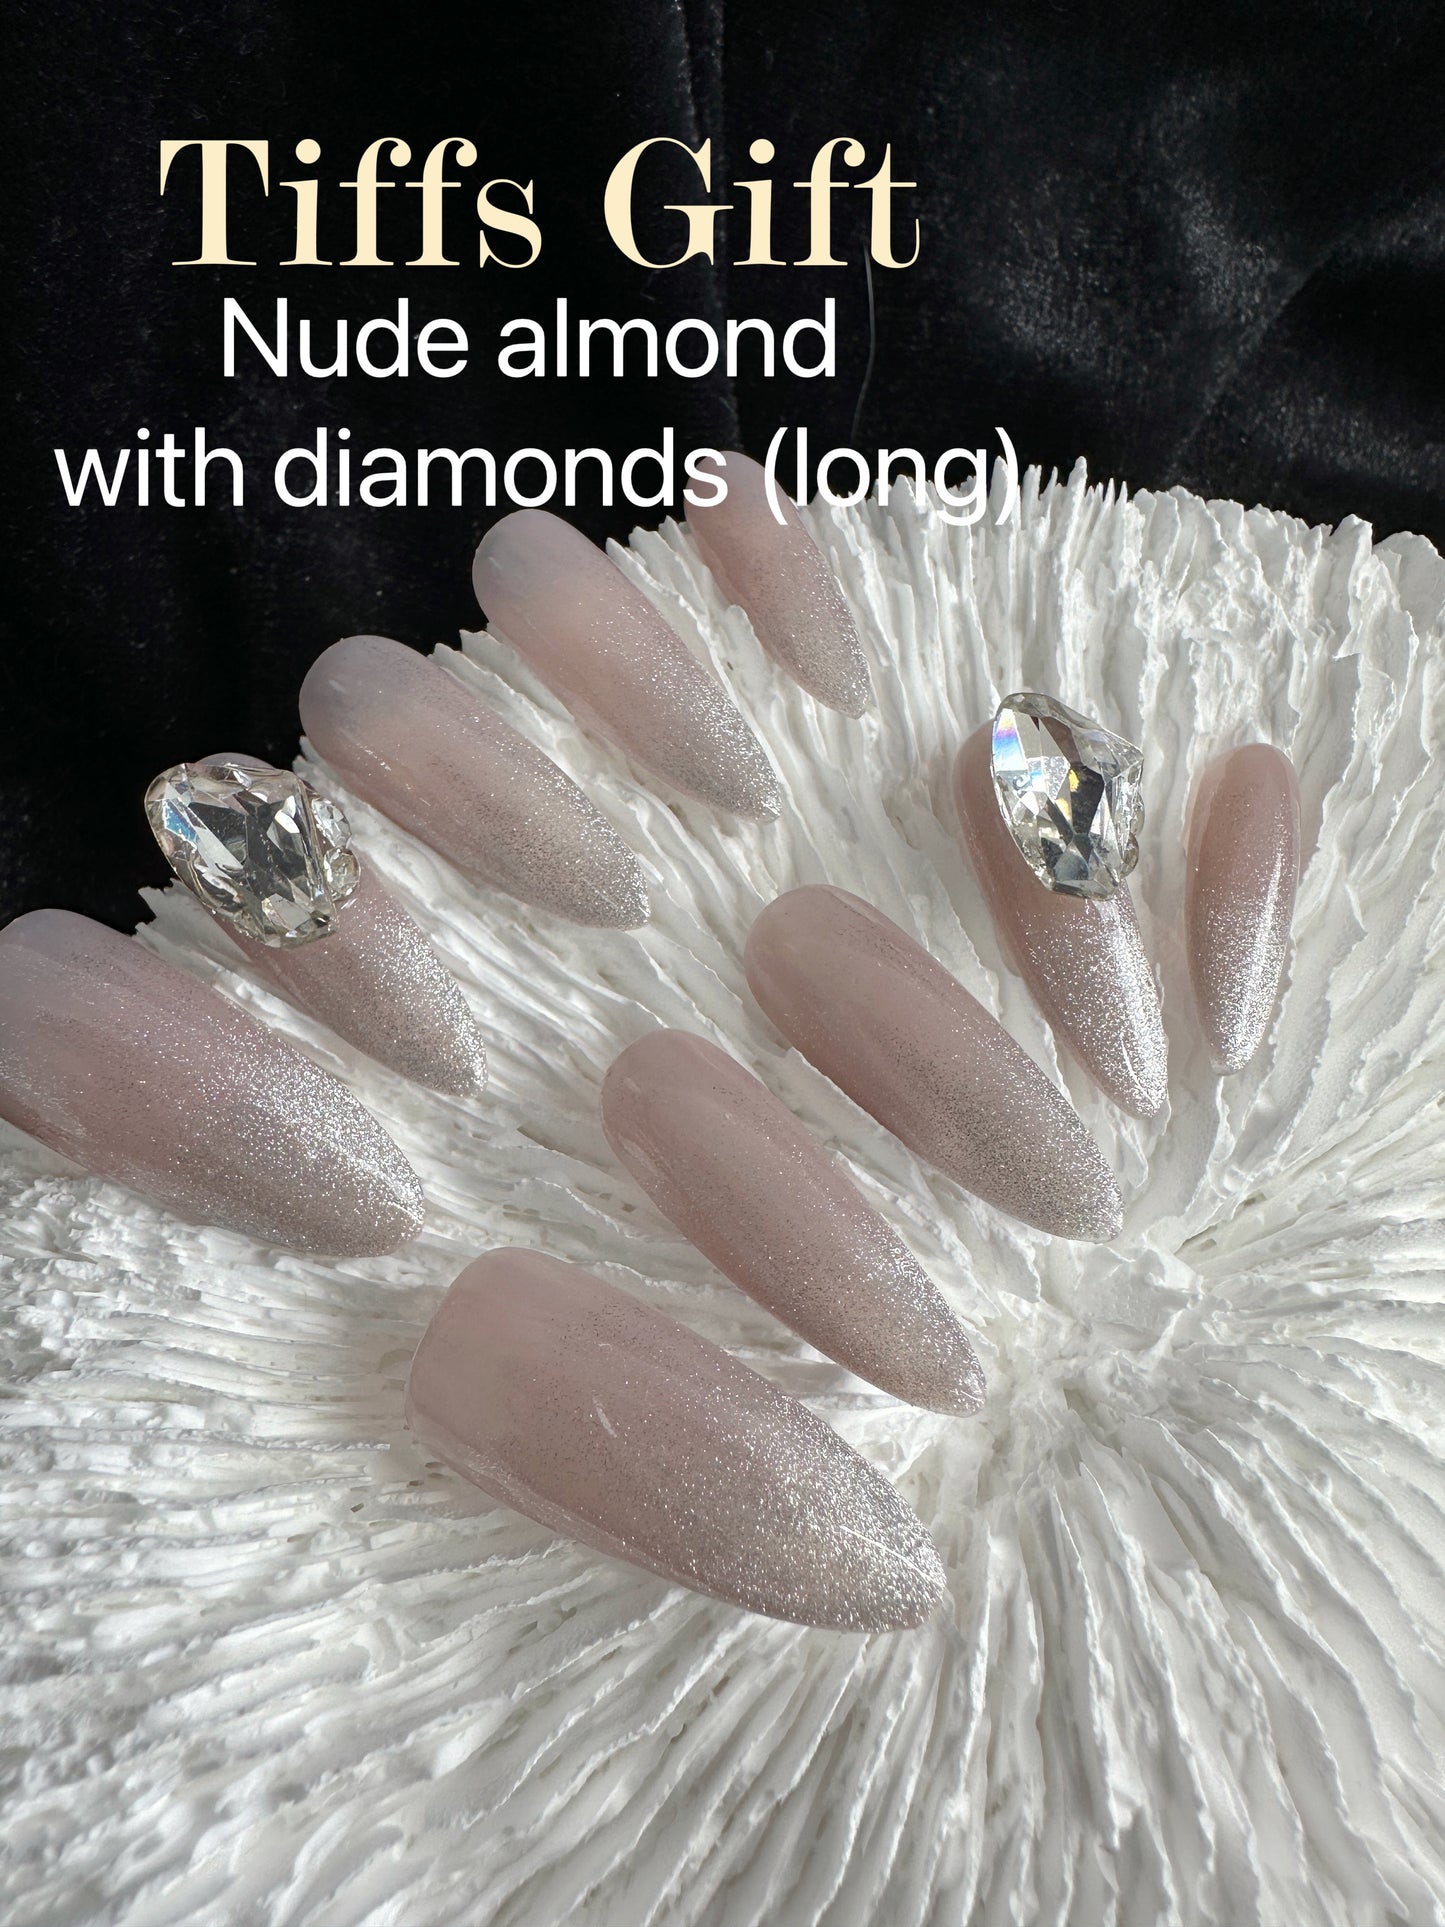 Nude almond with diamonds (long) Reusable Hand Made Press On Nails Fake Nails